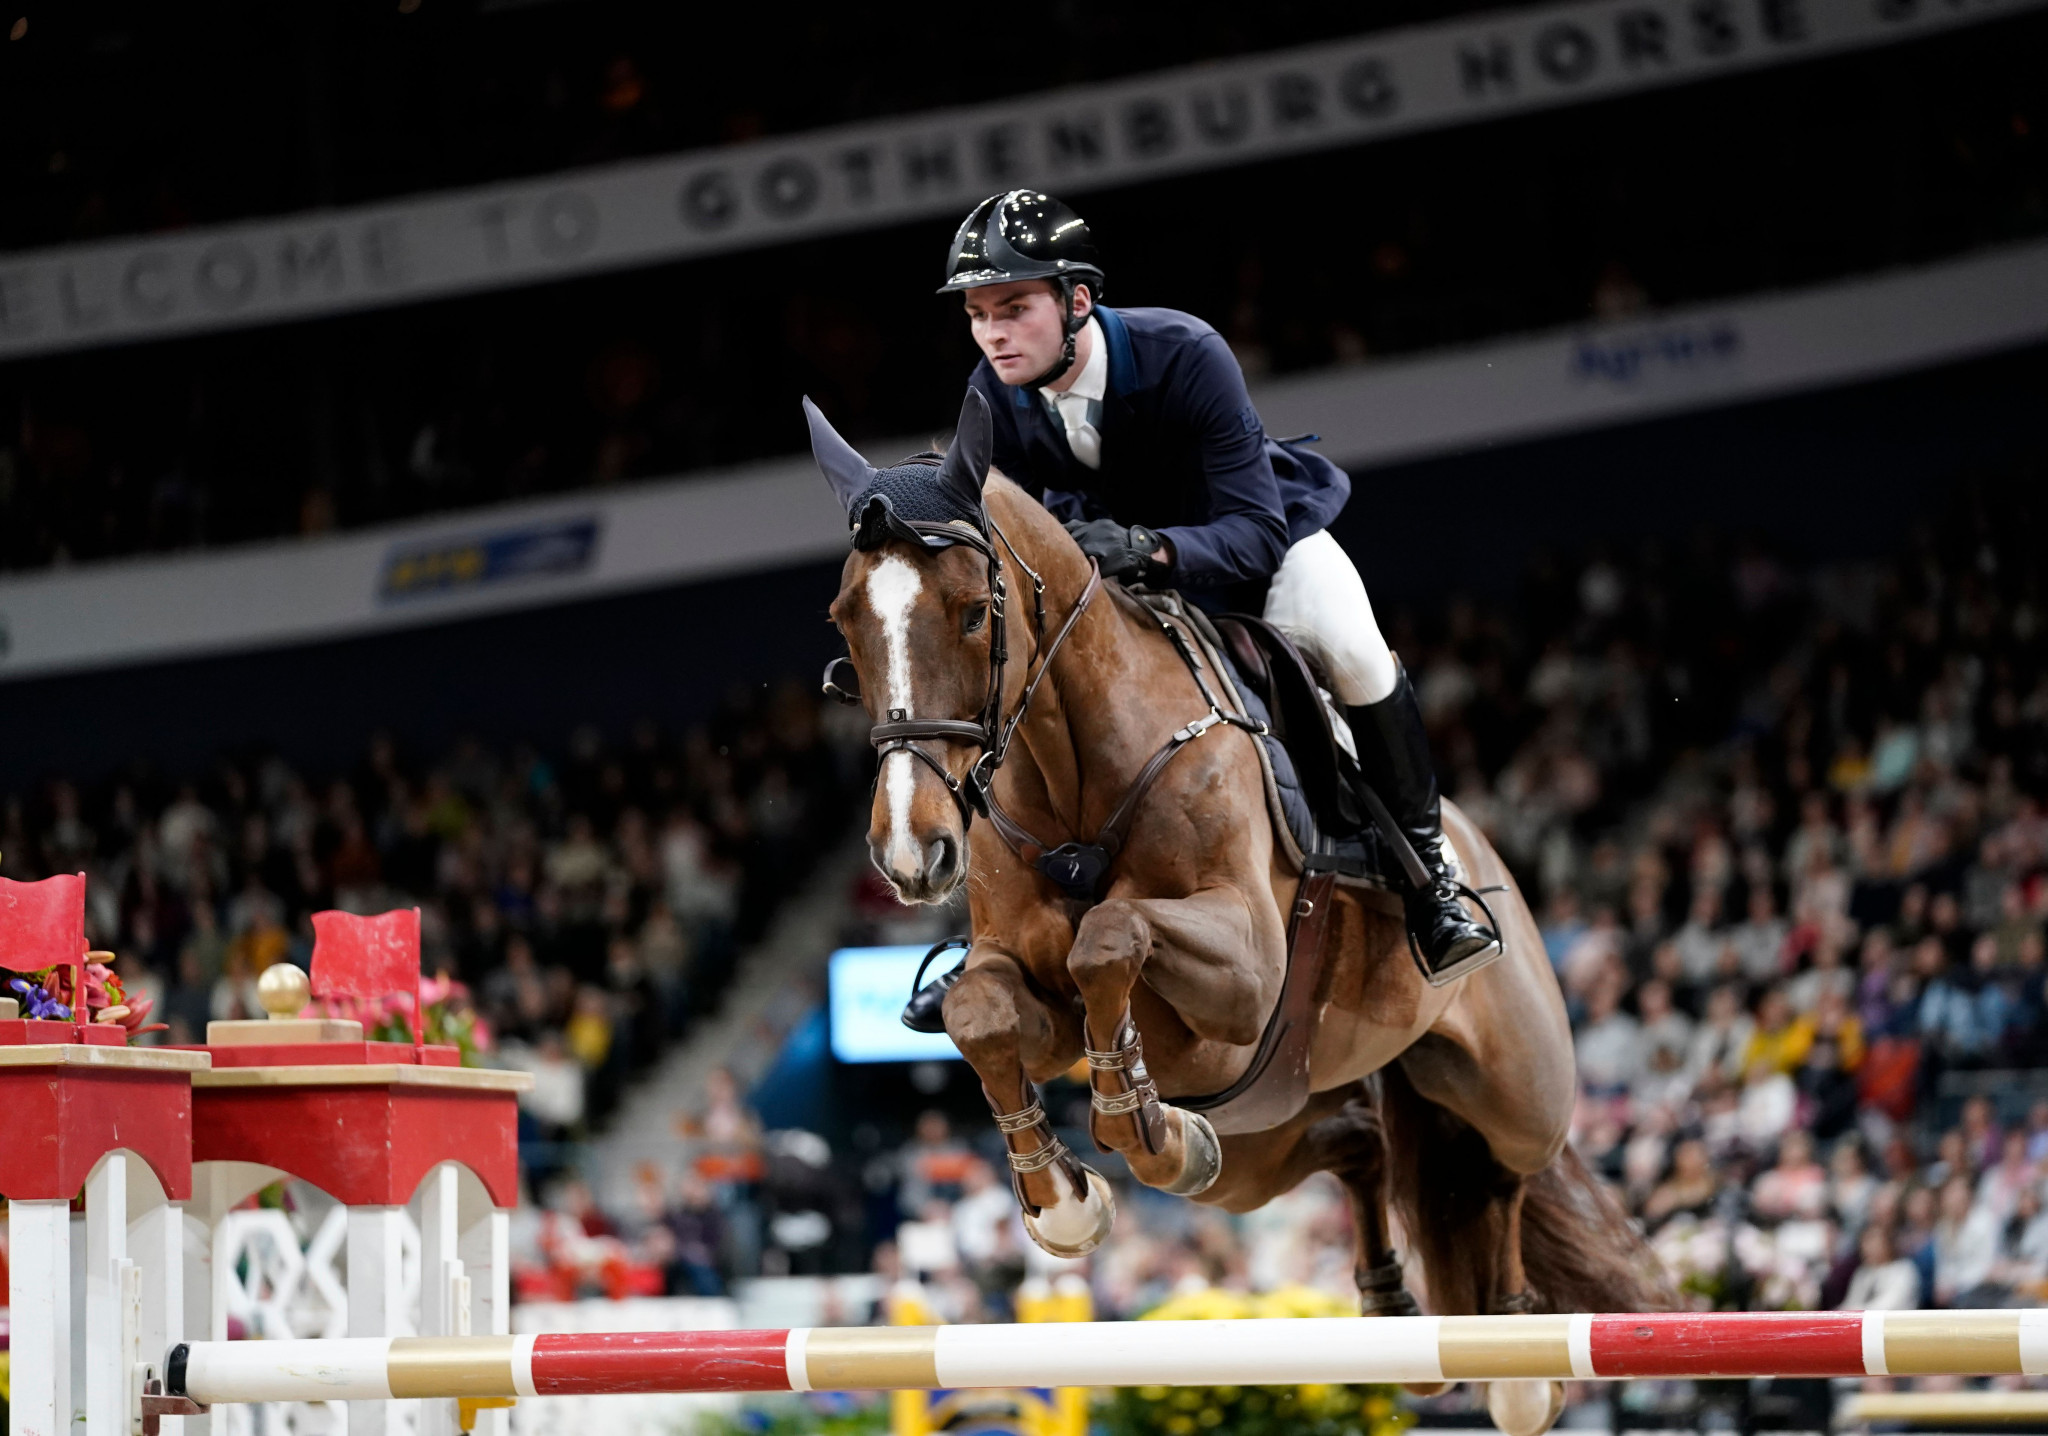 Gothenburg was set to host the FEI Jumping and Dressage World Cup Finals before the EHV-1 outbreak ©Getty Images